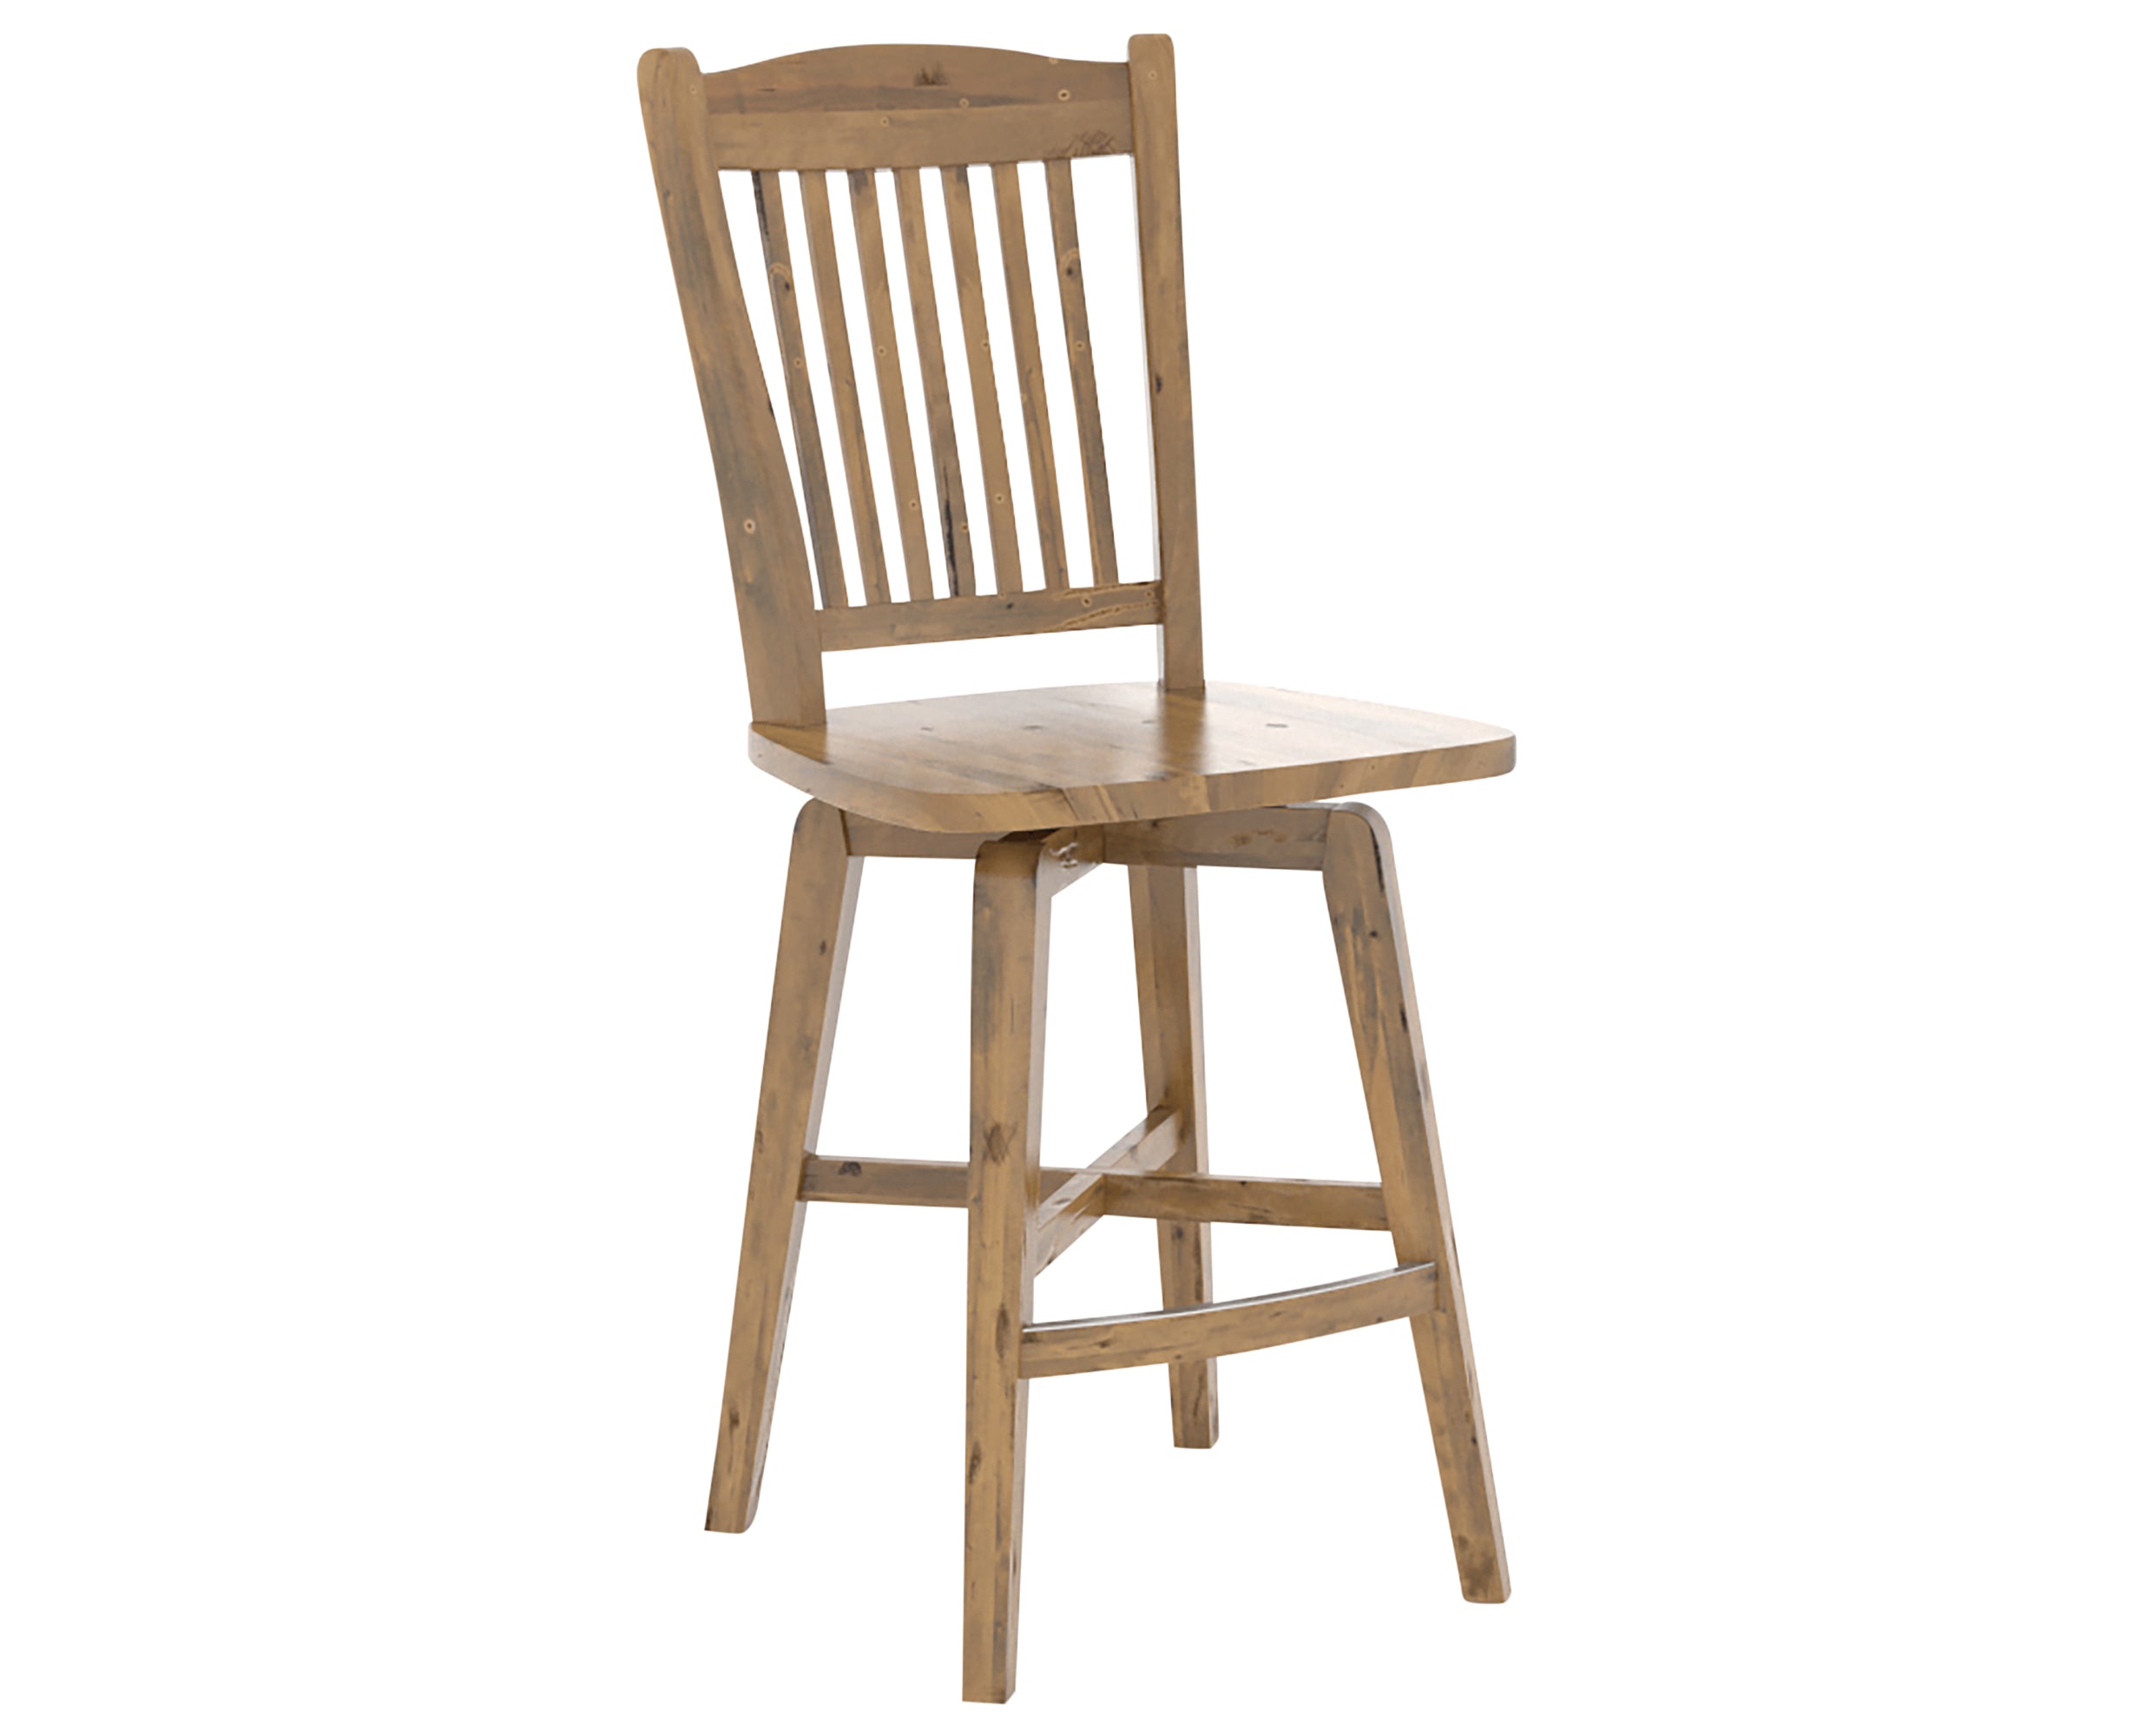 Oak Washed | Canadel Champlain Counter Stool 7232 | Valley Ridge Furniture